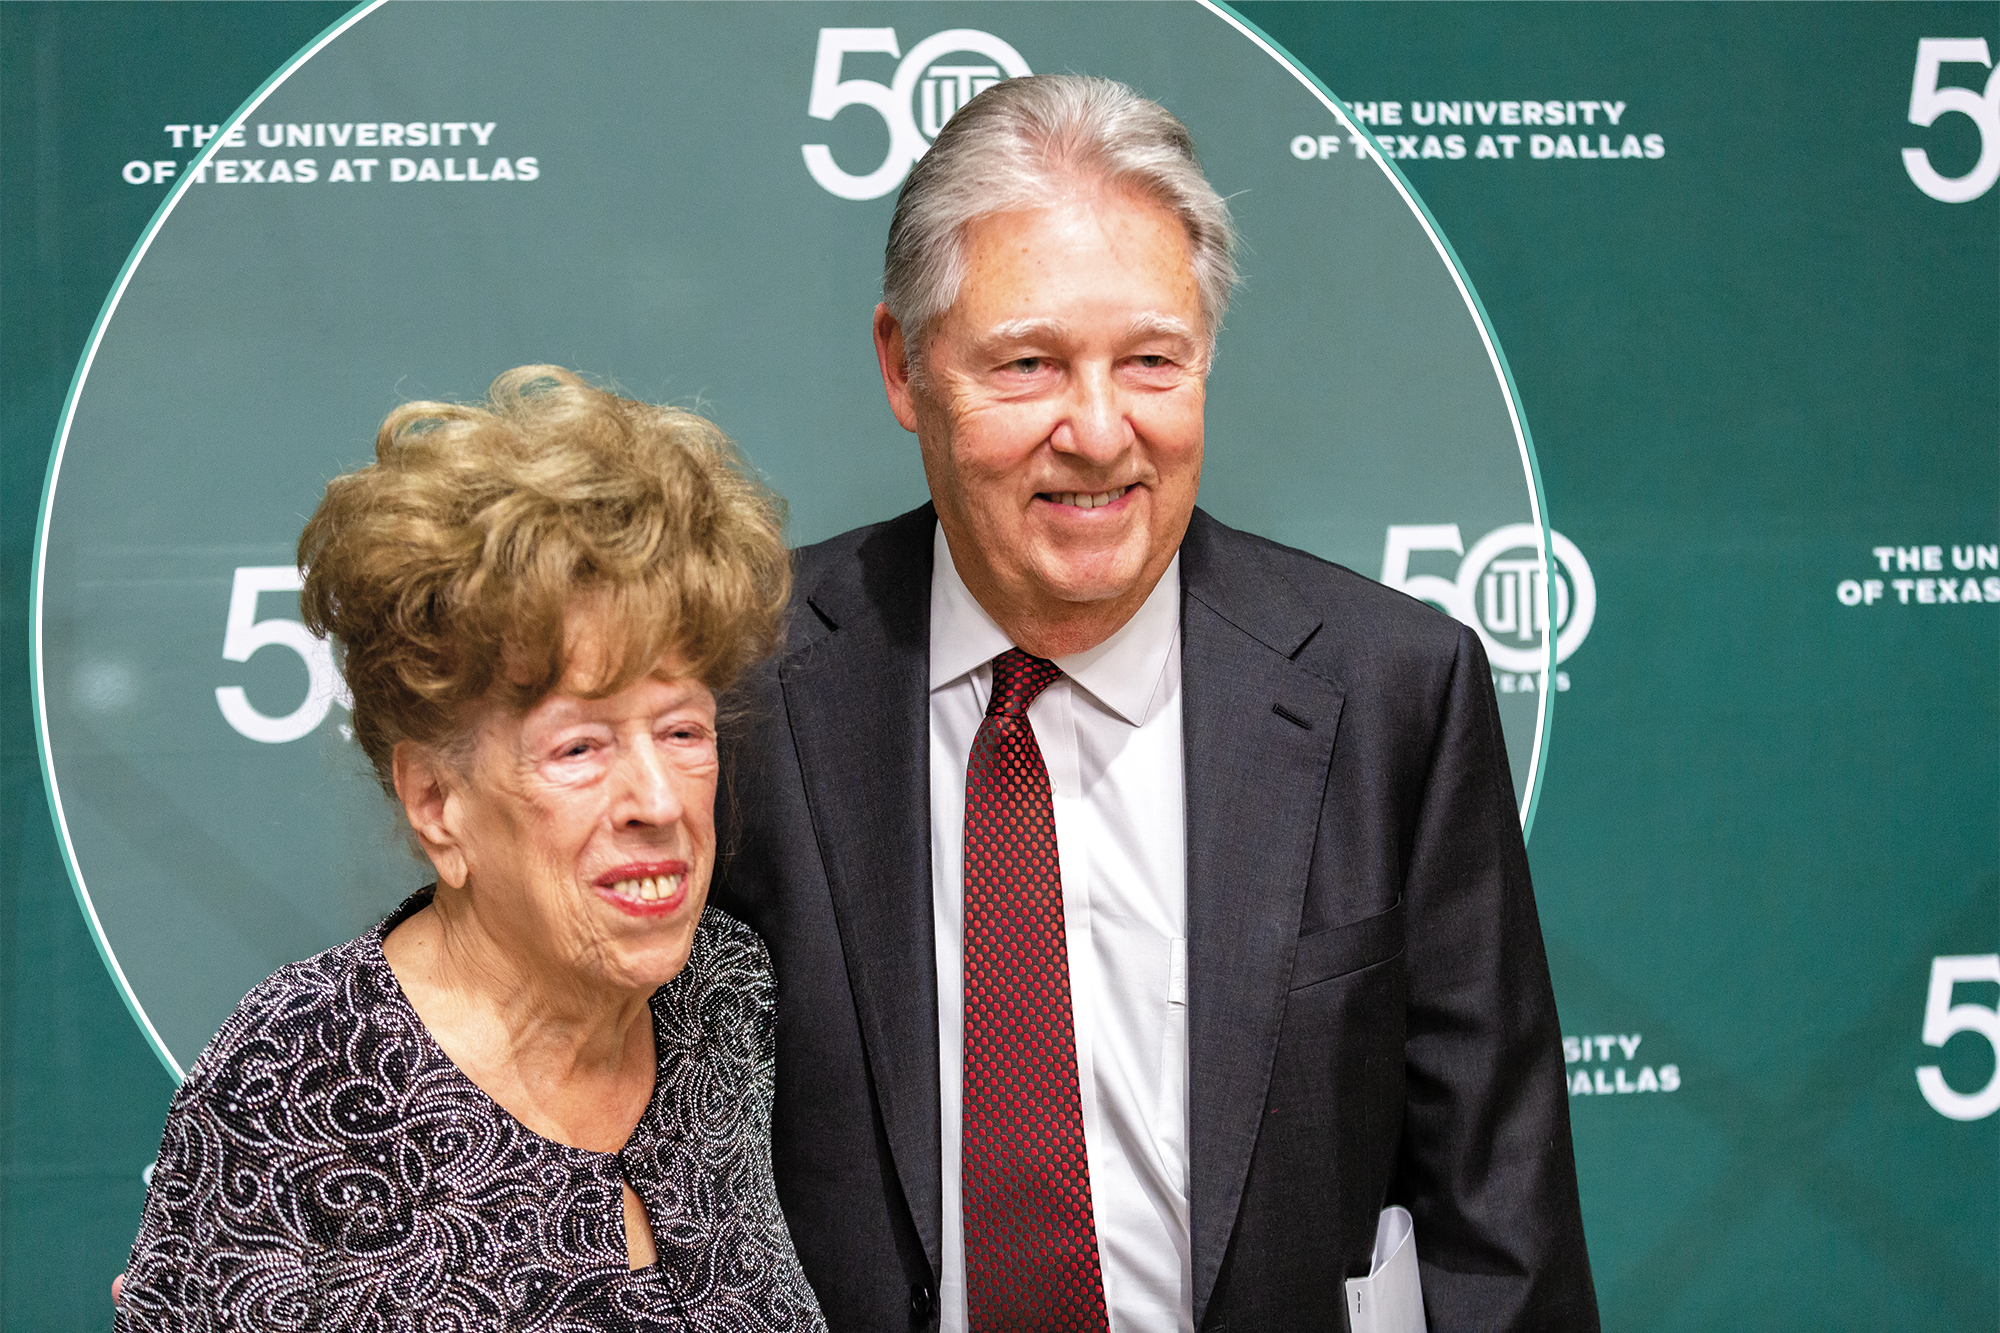 Dr. Zsuzsanna Ozsváth and Dr. Hobson Wildenthal pose for a photograph at the Ackerman Center Leadership Dinner.